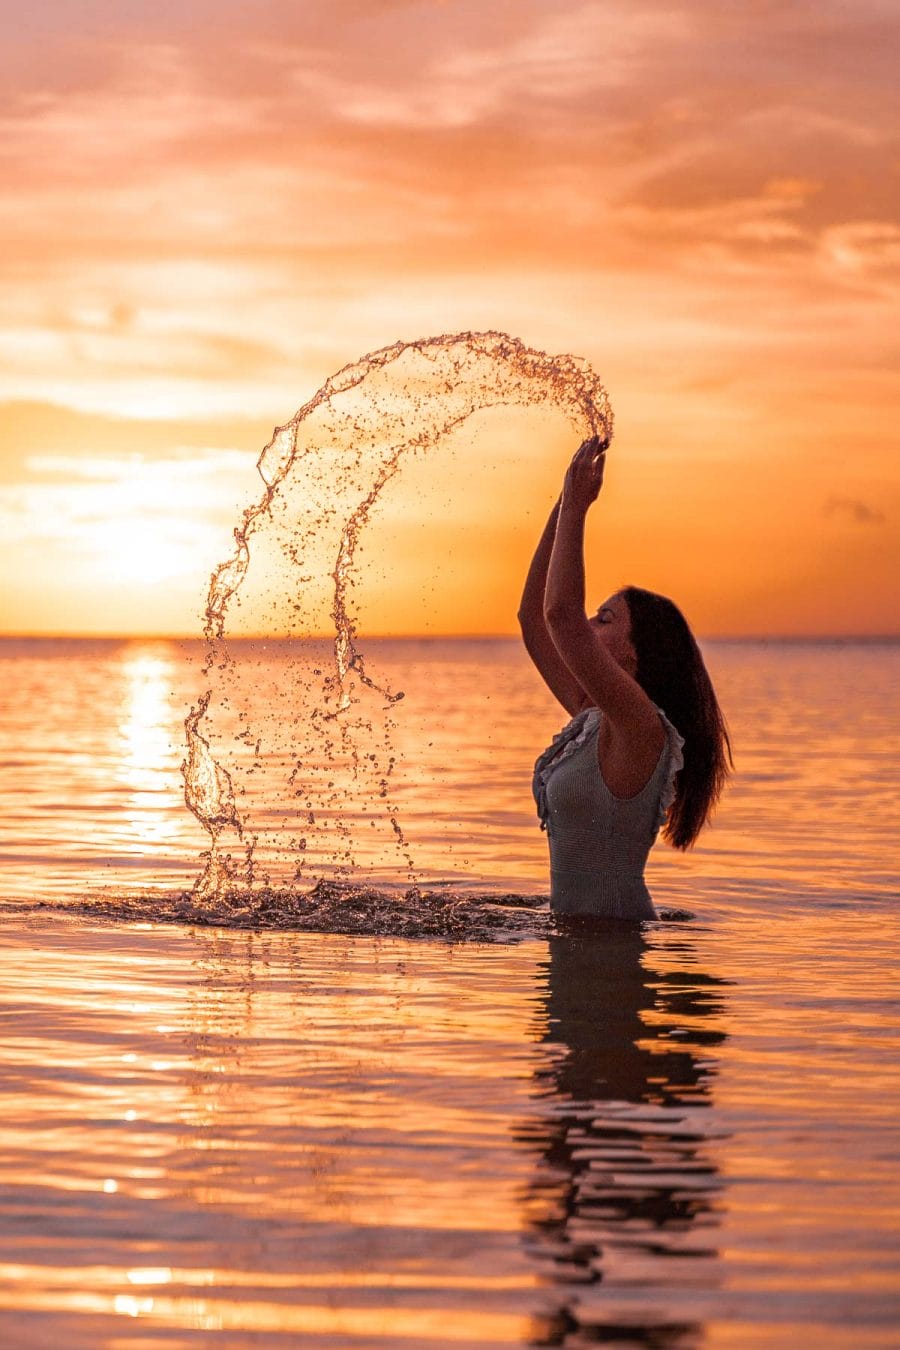 Girl throwing water up in the air in the ocean at sunset in Siquijor, Philippines